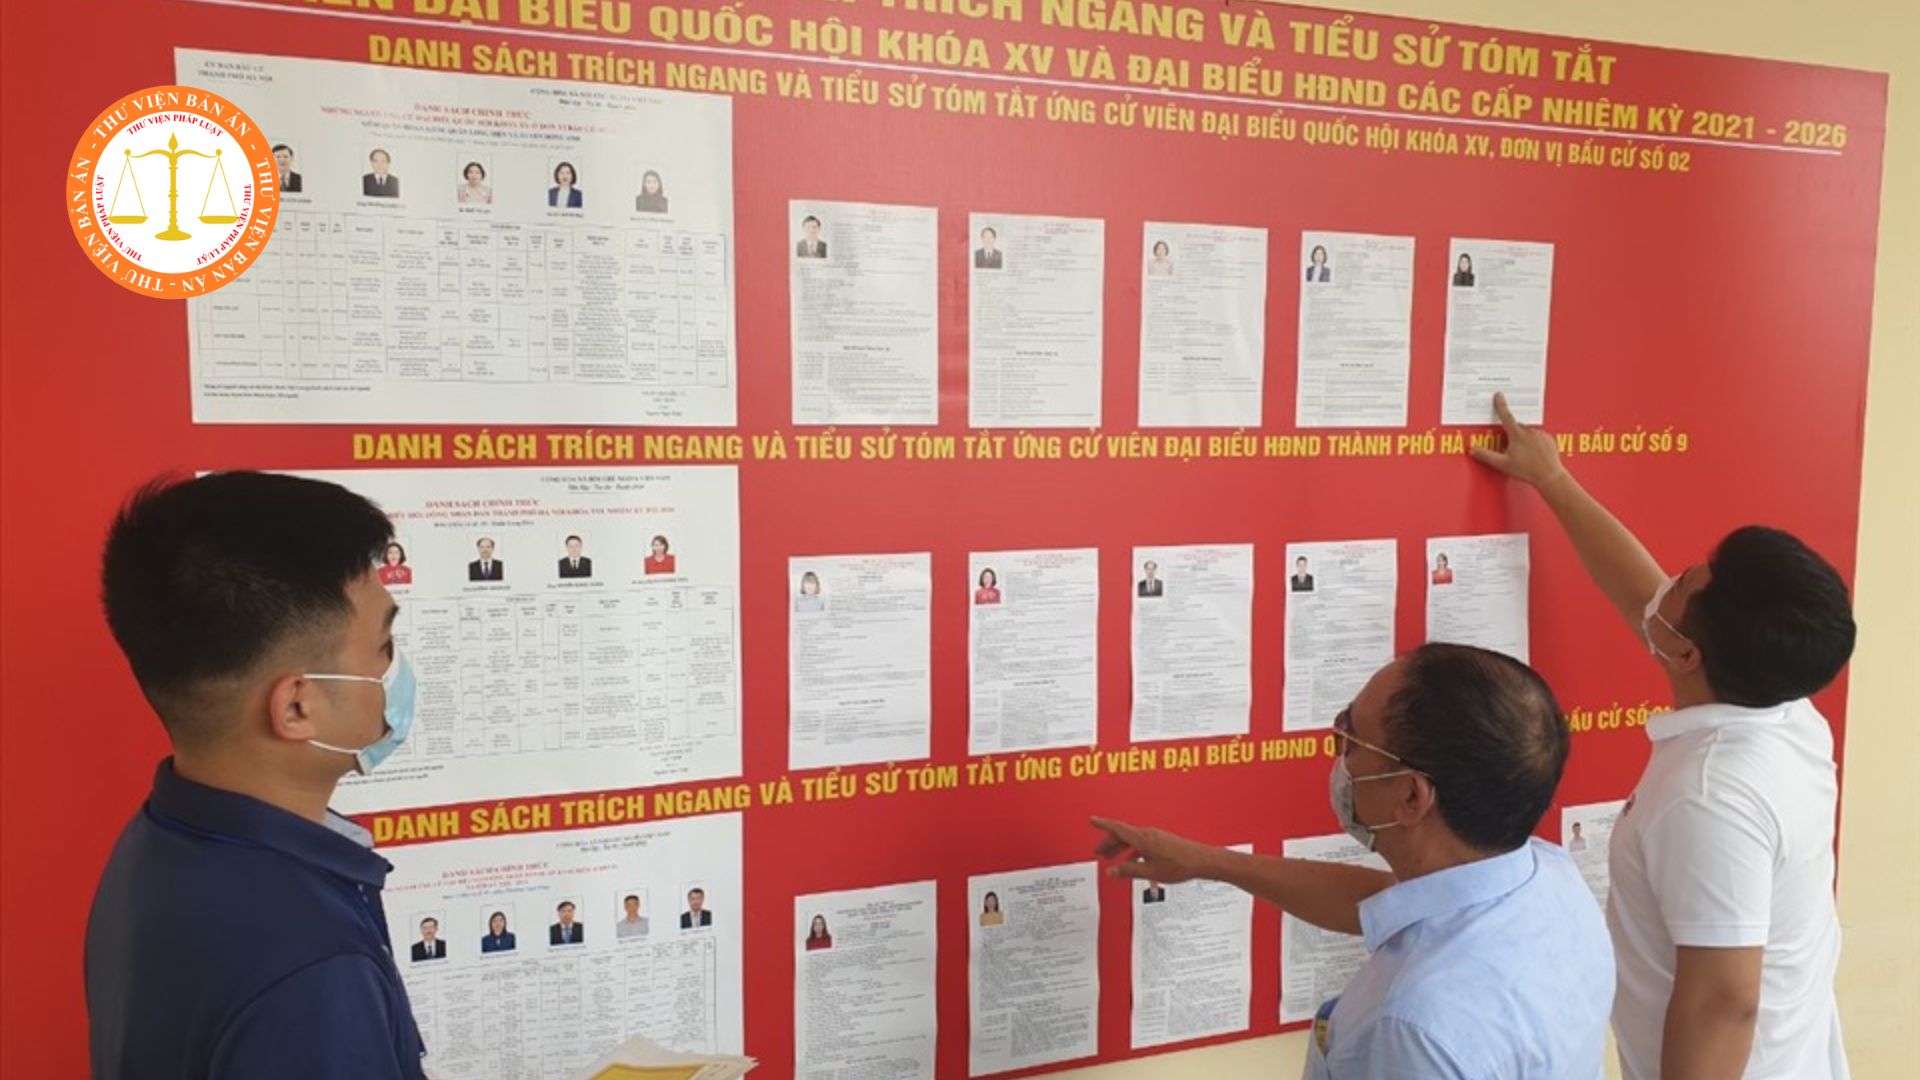 Regulations on violations against law on voting in Vietnam